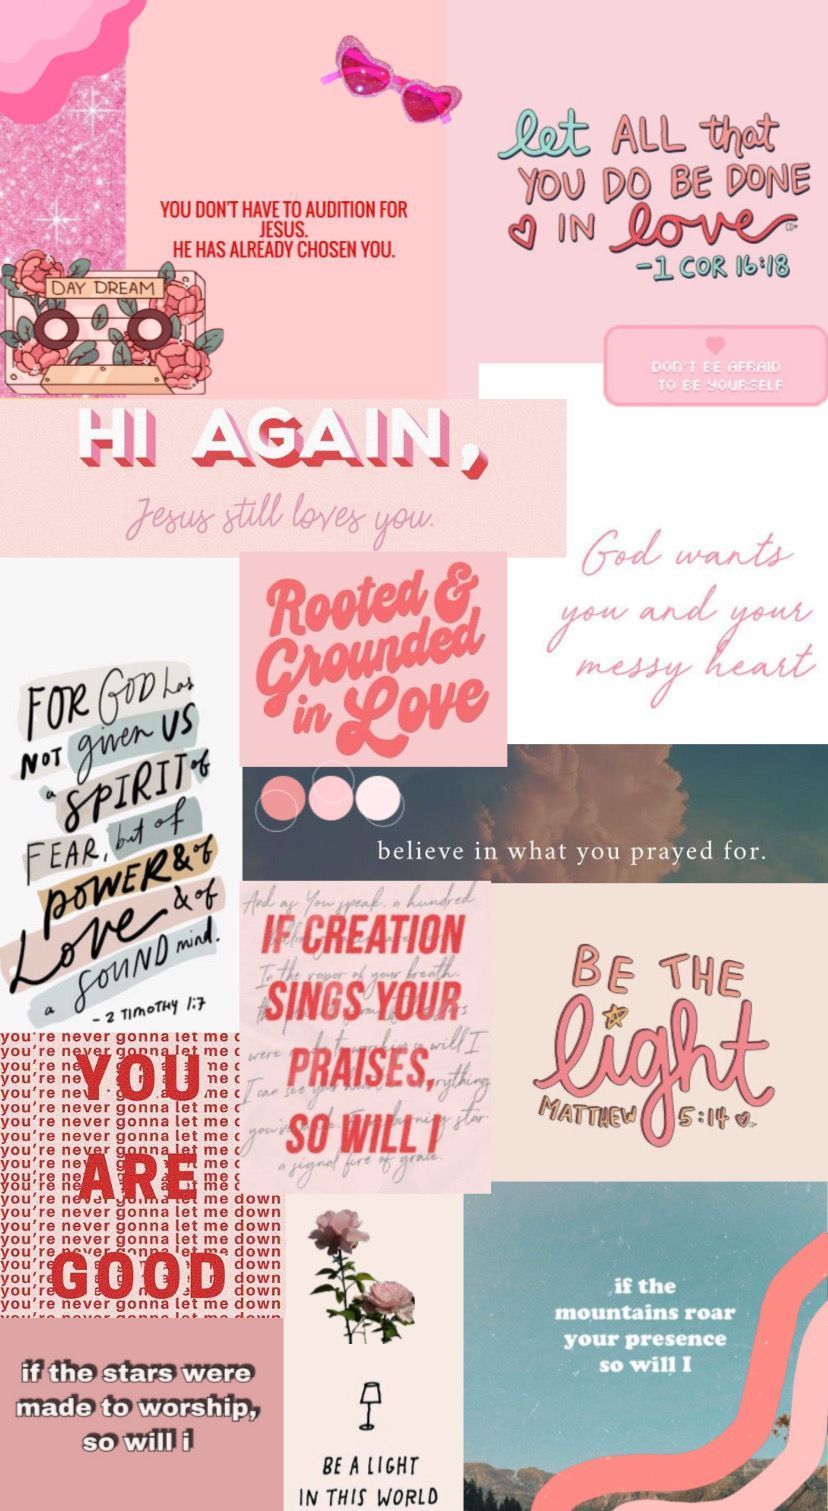 Aesthetic pink phone background with religious quotes - Jesus